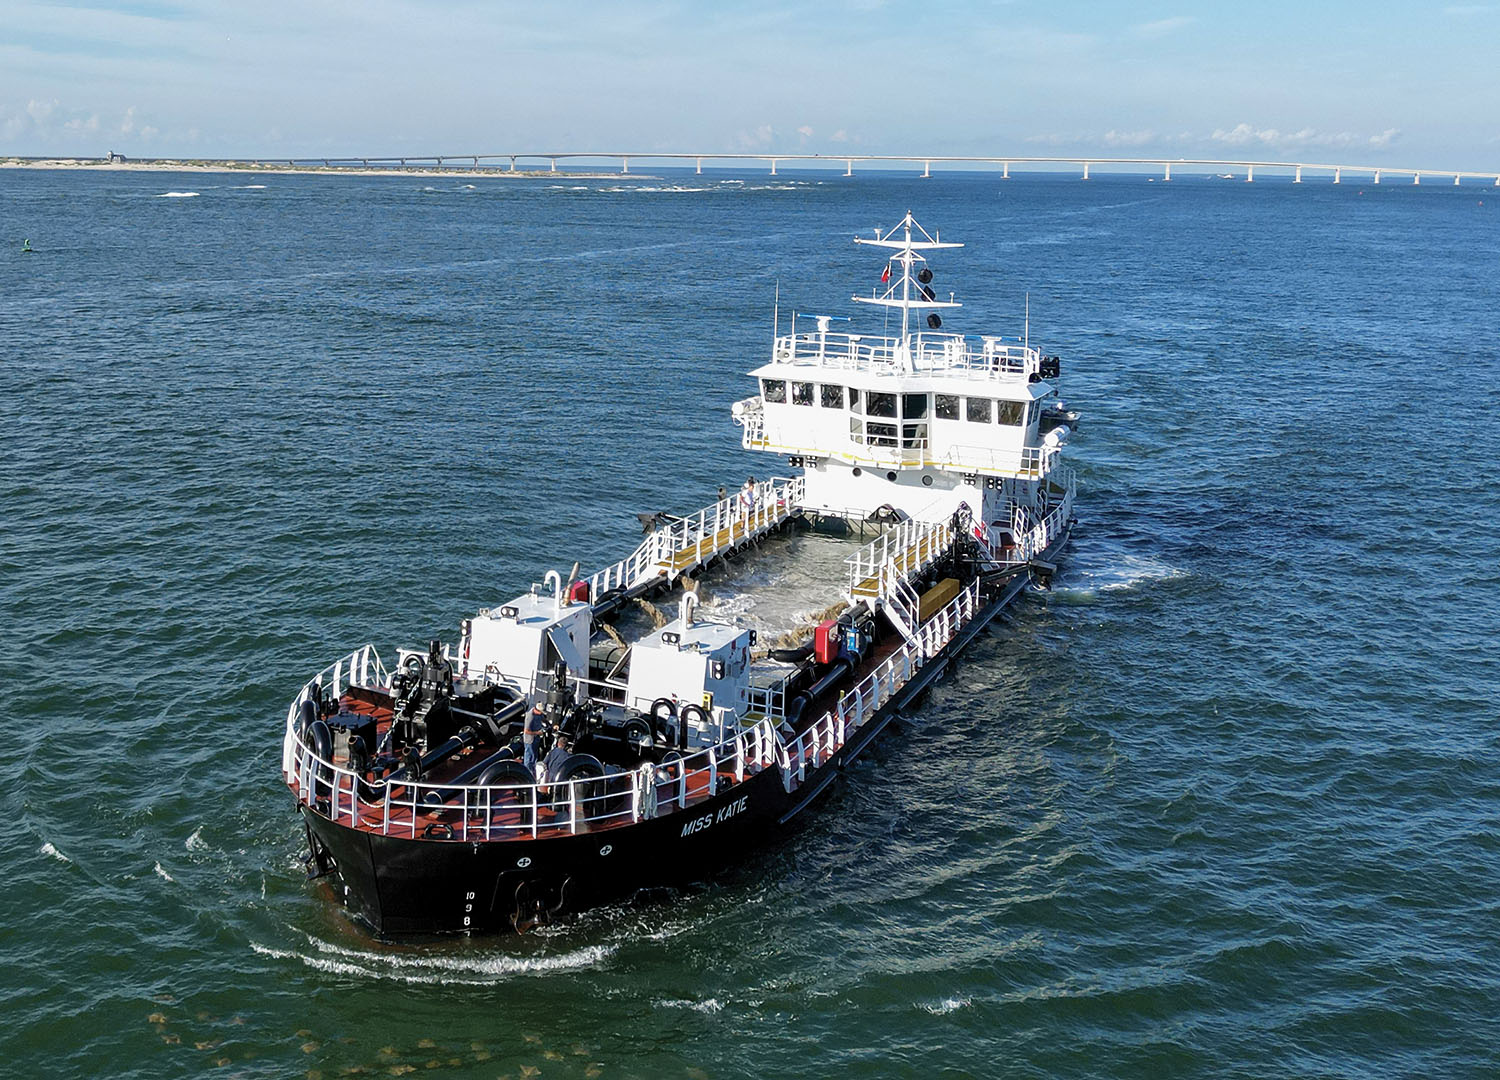 The Miss Katie is a 156-foot shallow-draft, split-hulled hopper dredge built by Conrad Shipyard at Morgan City, La. It is owned and operated by EJE Dredging Service of Wanchese, N.C., and provides dredging to Dare County, N.C. (photo courtesy of EJE Dredging Service LLC)